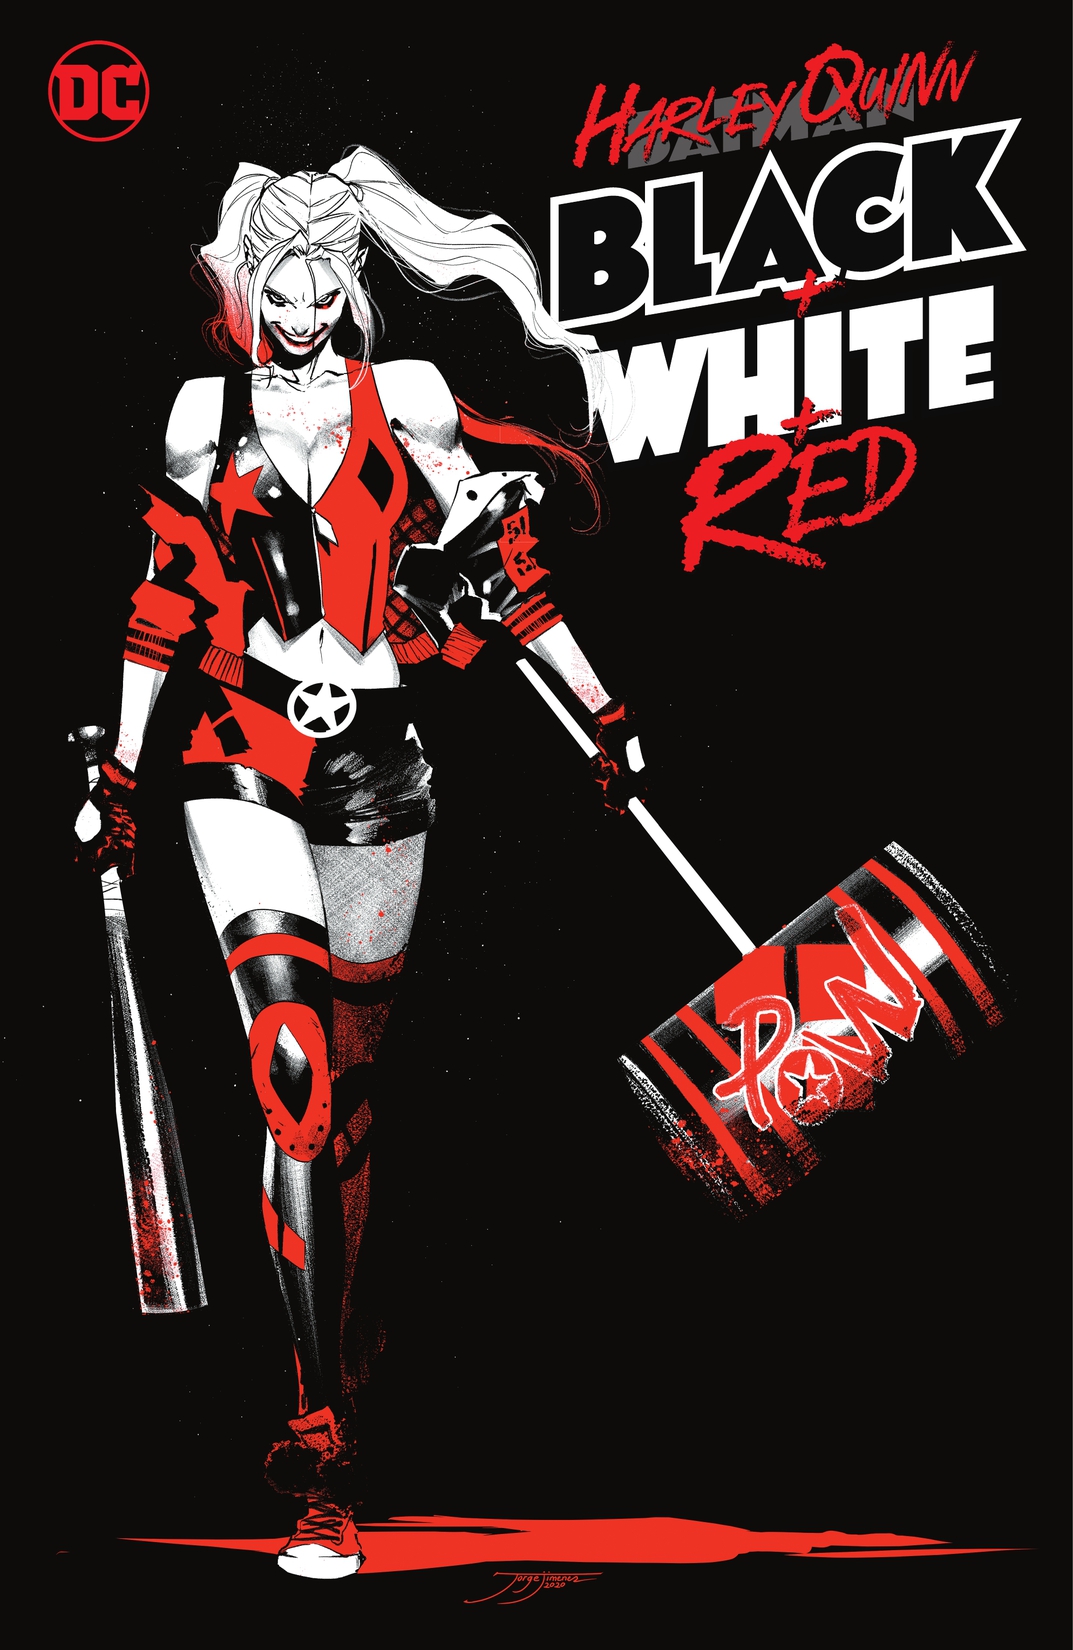 Harley Quinn Black + White + Red preview images